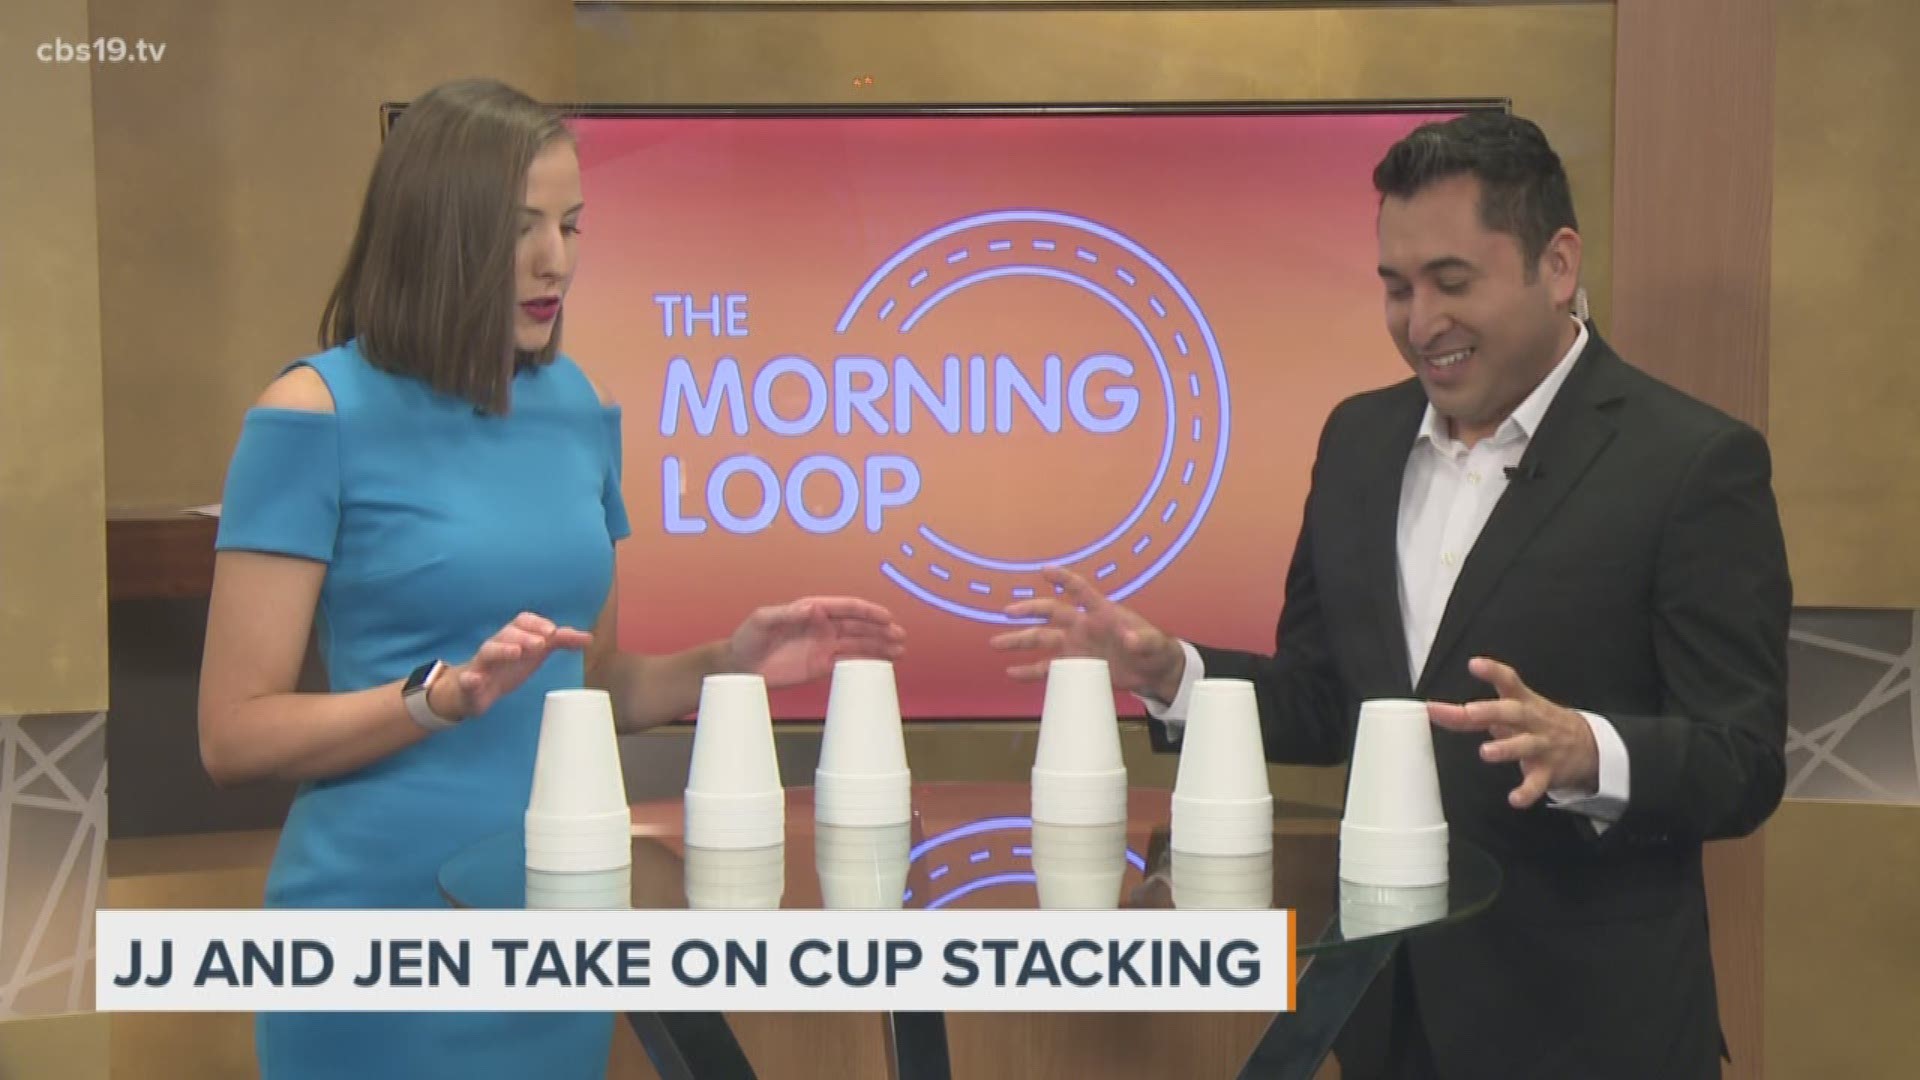 Sports stacking has been around since the 1980's. The goal is to stack plastic cups into a formation as fast as you can. The Morning Loop team gives it a try. 